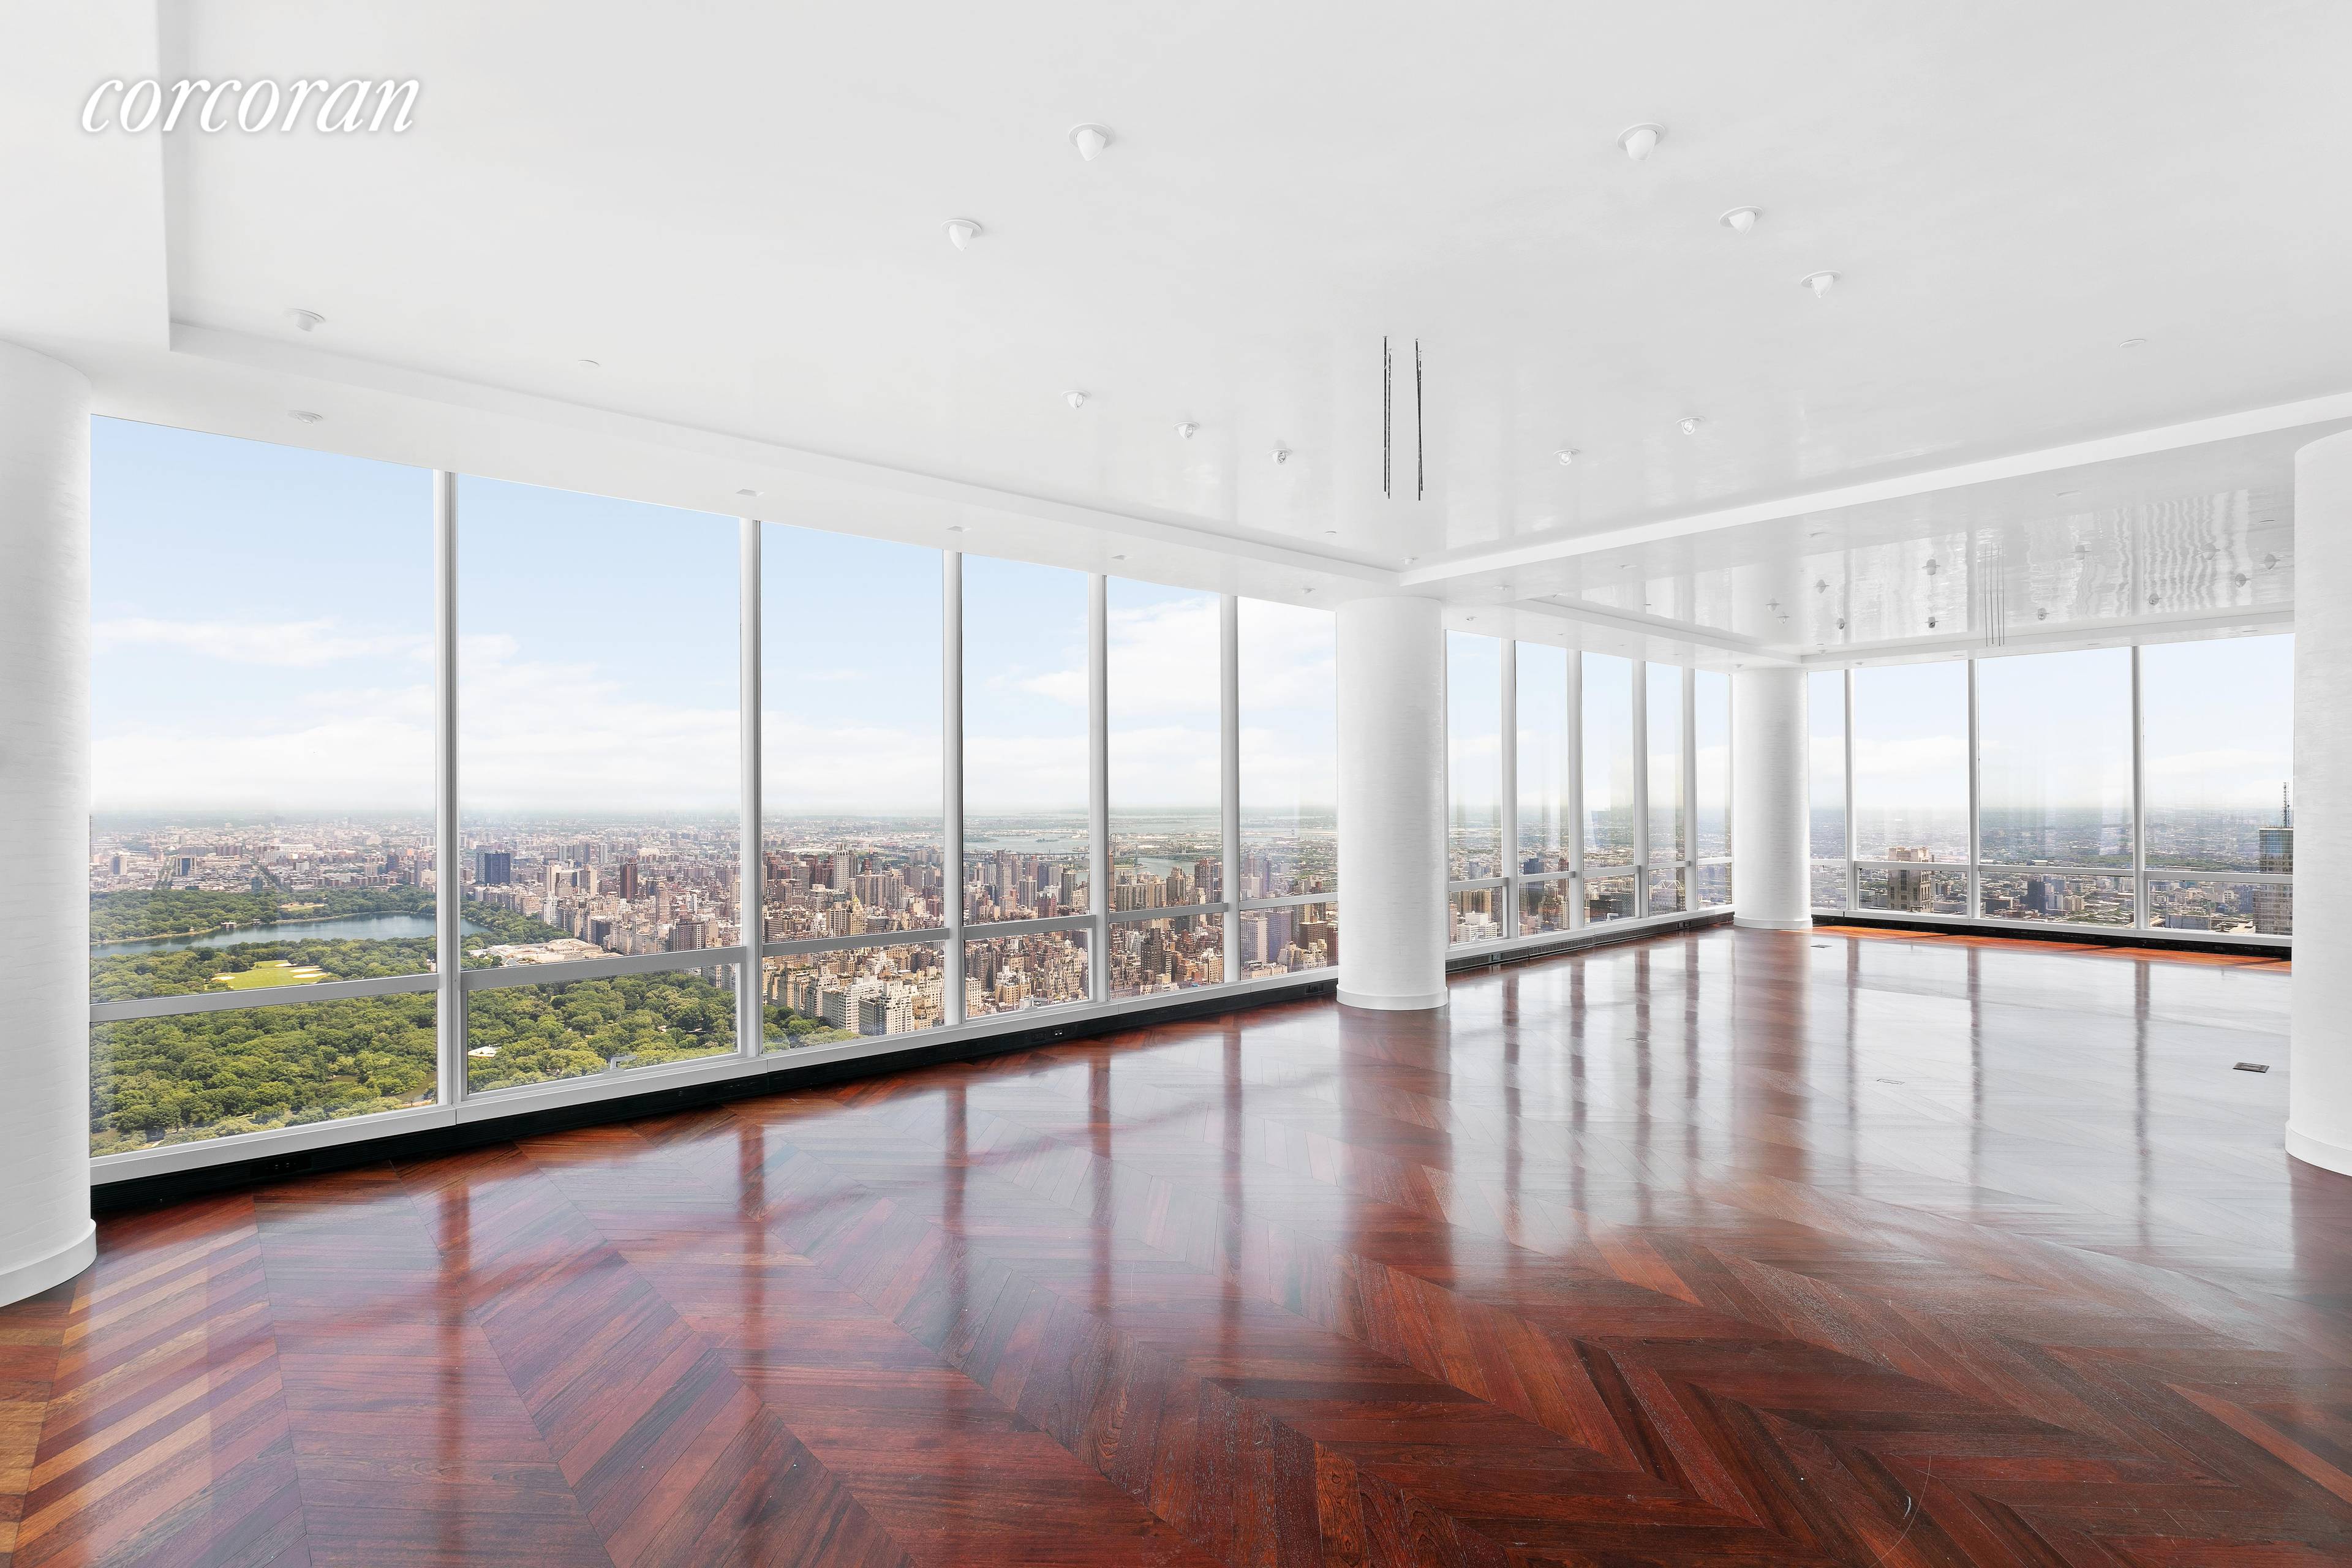 Residence 86 at One57 Spectacular Full Floor Residence with Panoramic Skyline and Central Park Views Four Bedrooms Five Baths Powder Room 6, 240 sqft This significant private full floor residence ...